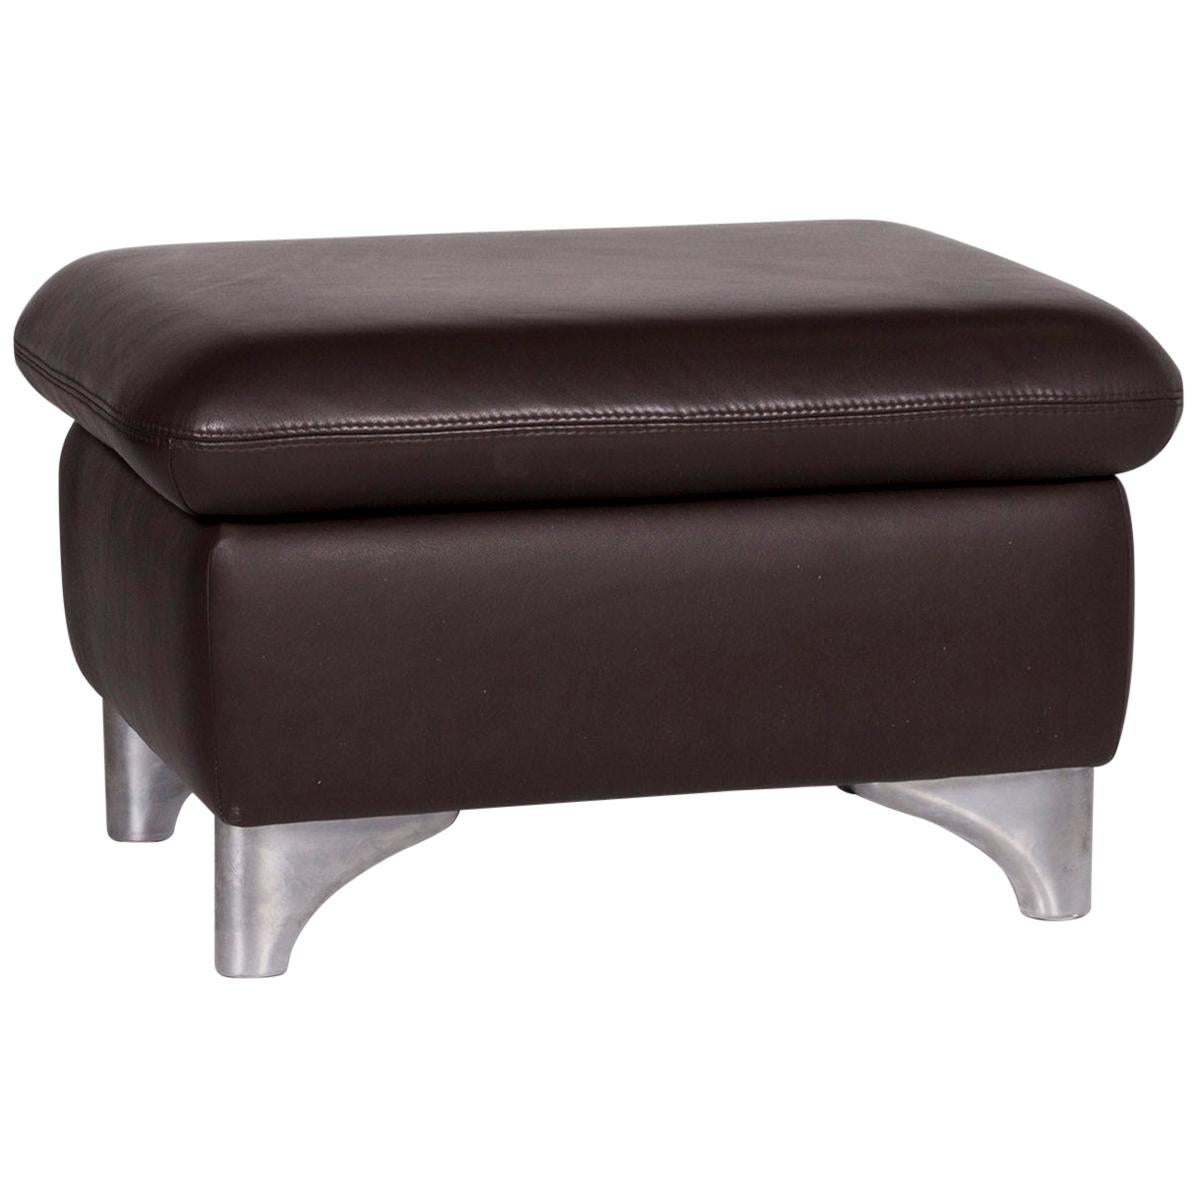 Willi Schillig Leather Stool Brown Stool